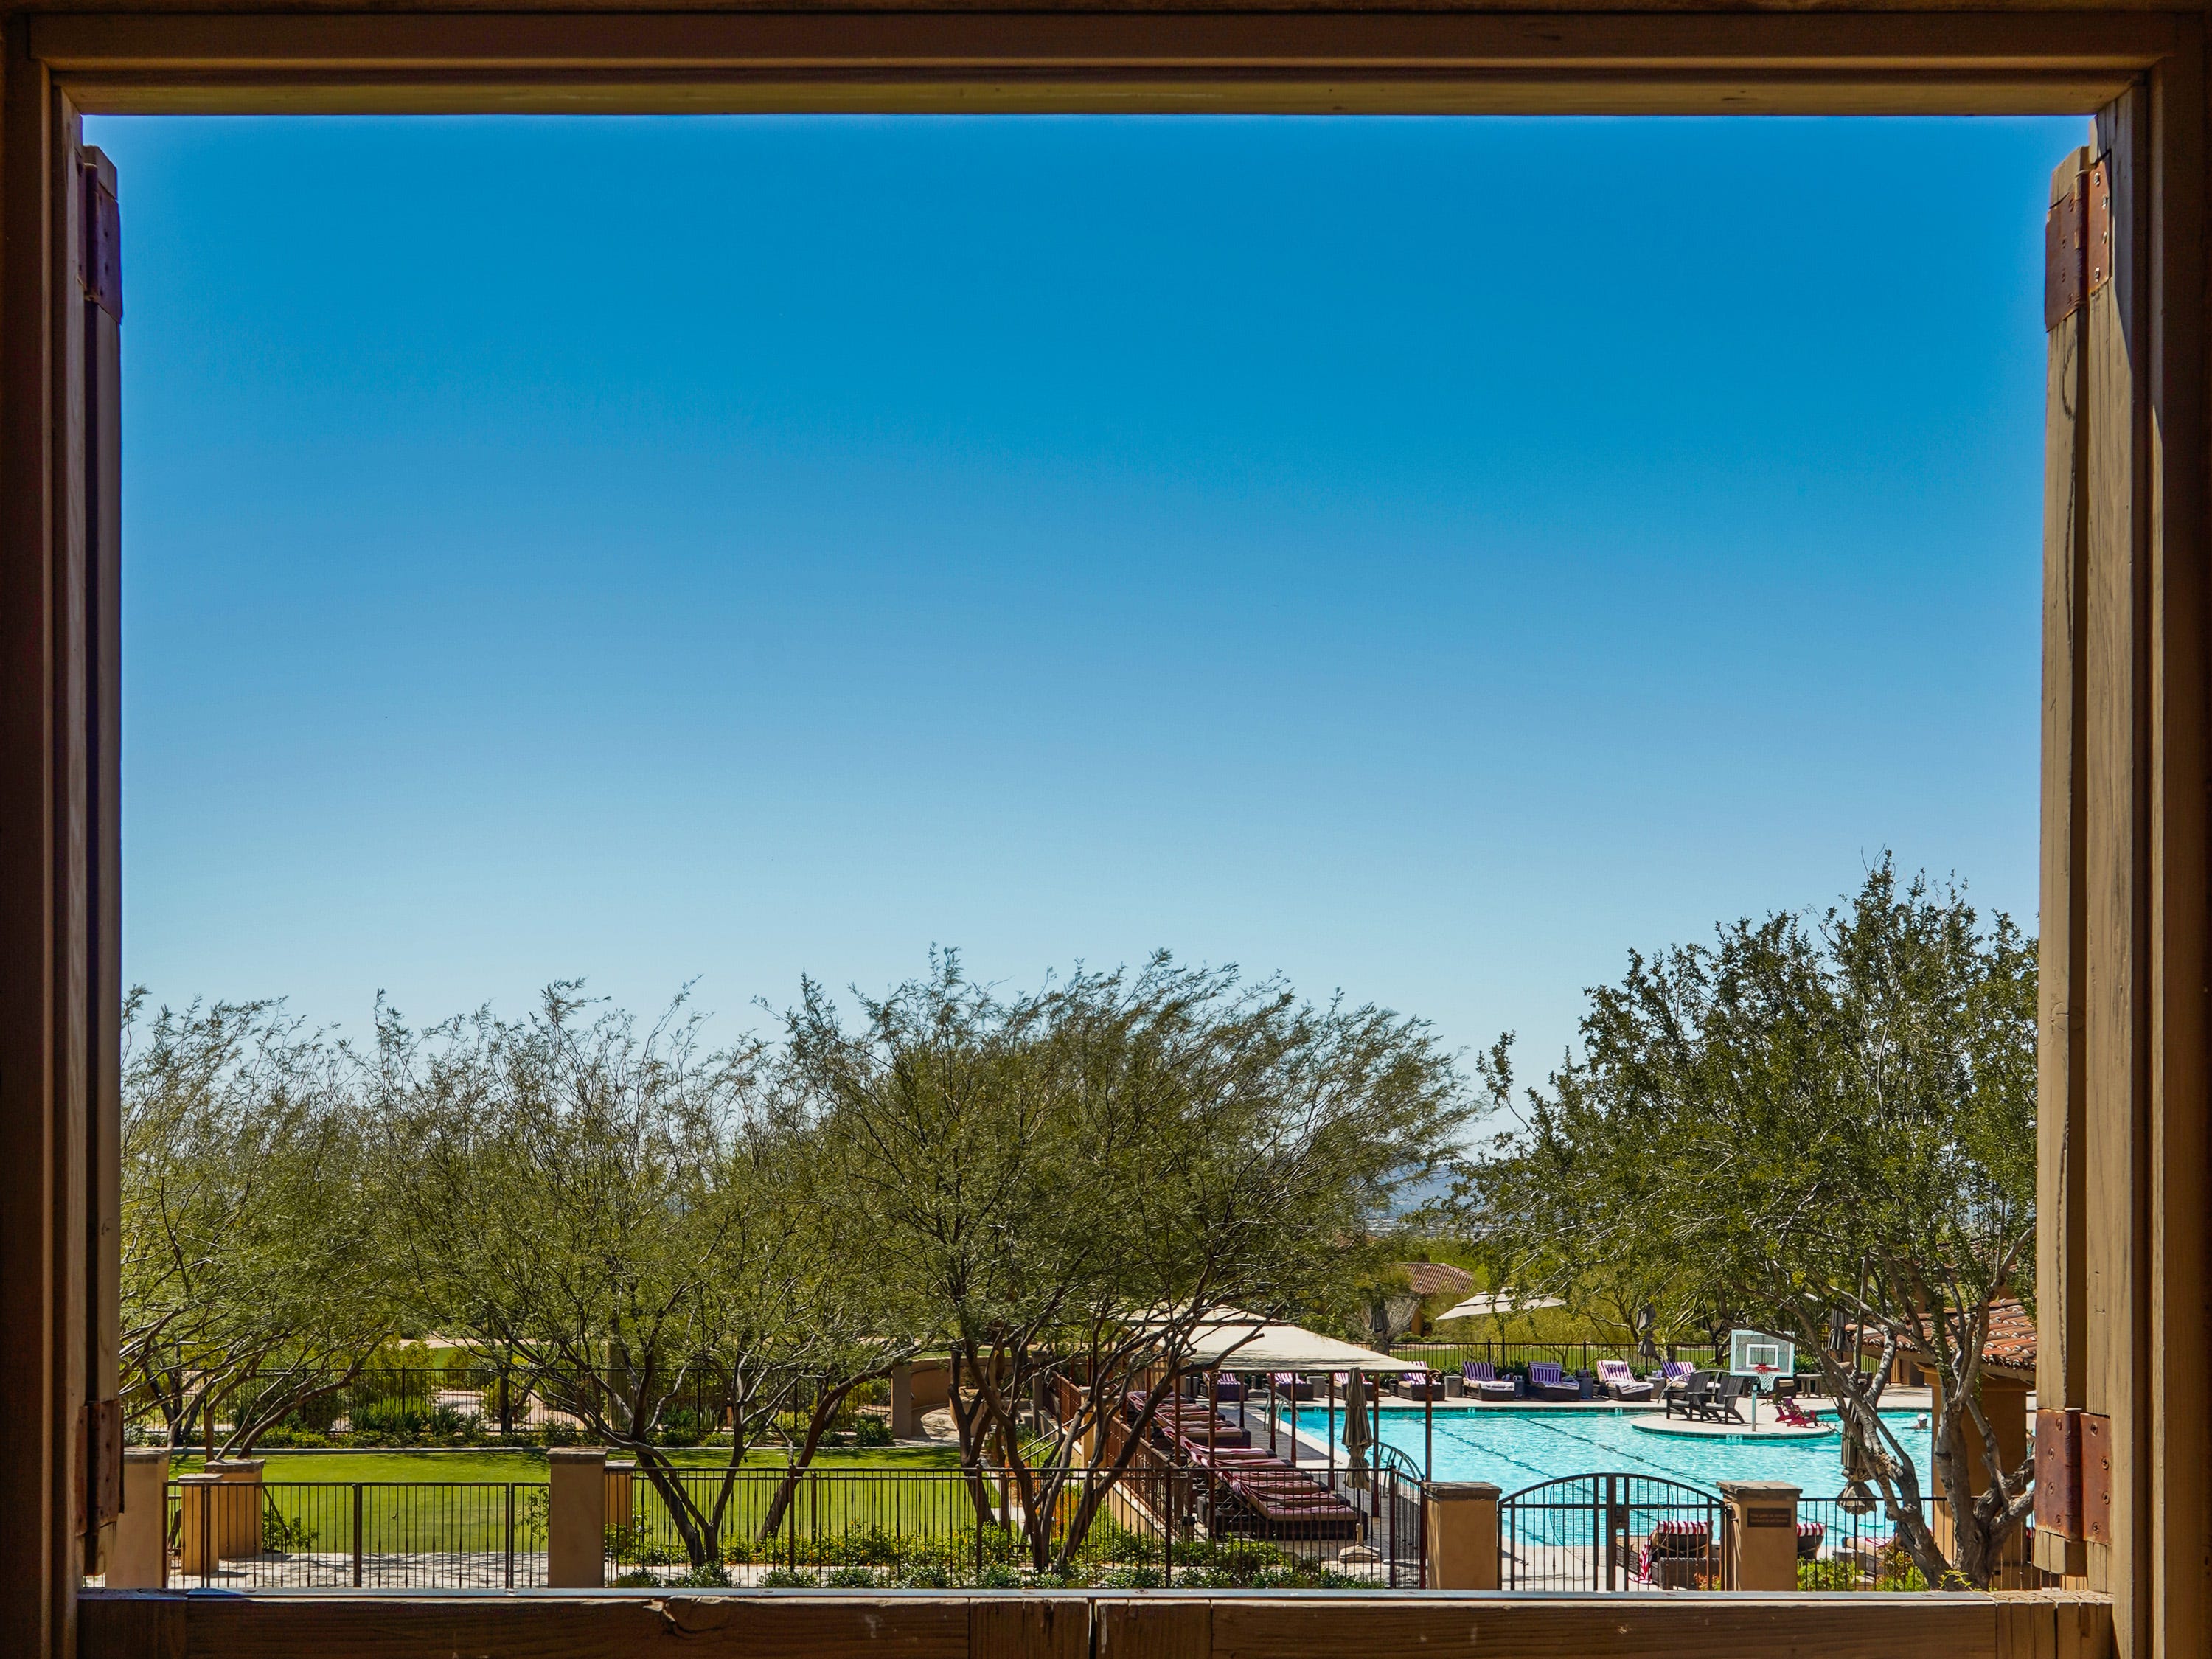 <p>DC Ranch has three clubs with high-end amenities that reminded me of my stay at the Phoenician.</p><p>DC Ranch Village Health Club & Spa has a gym, group fitness classes, multiple pools, a day spa with a salon, and massage and facial services.</p><p>The other two are private golf clubs — the Country Club and the Silverleaf Club. In addition to 18-hole courses surrounded by mountains and desert terrain, these communities have tennis, pools, fitness centers, and restaurants, <a href="https://dcranch.com/nearby/golf-health-clubs/">according to the neighborhood's website</a>.</p><p>The Silverleaf Club, home to a championship golf course, also has a world-class spa.</p><p>I got an inside look at the Country Club and spotted a sign that said "dress code enforced" — a <a href="https://www.businessinsider.com/millennials-dont-like-country-clubs-membership-dues-evolution-2019-10">golf club tradition</a> phased out in many areas to appeal to <a href="https://www.businessinsider.com/millennials-baby-boomers-spending-budgets-food-housing-expenses-inflation-2024-5">millennials on a budget</a>.</p><p>But the tradition remains in several Scottsdale golf clubs. At the Country Club, adults and children aren't allowed to wear t-shirts, short shorts or skirts, athletic wear, or tank tops (unless they're tailored and specifically designed for tennis or golf), <a href="https://www.ccdcranch.com/Dress-Code-for-the-Club-85C7.html">according to the club's website</a>.</p><p>I spotted members in collared shirts, golf shorts, and tennis skirts during my visit.</p>